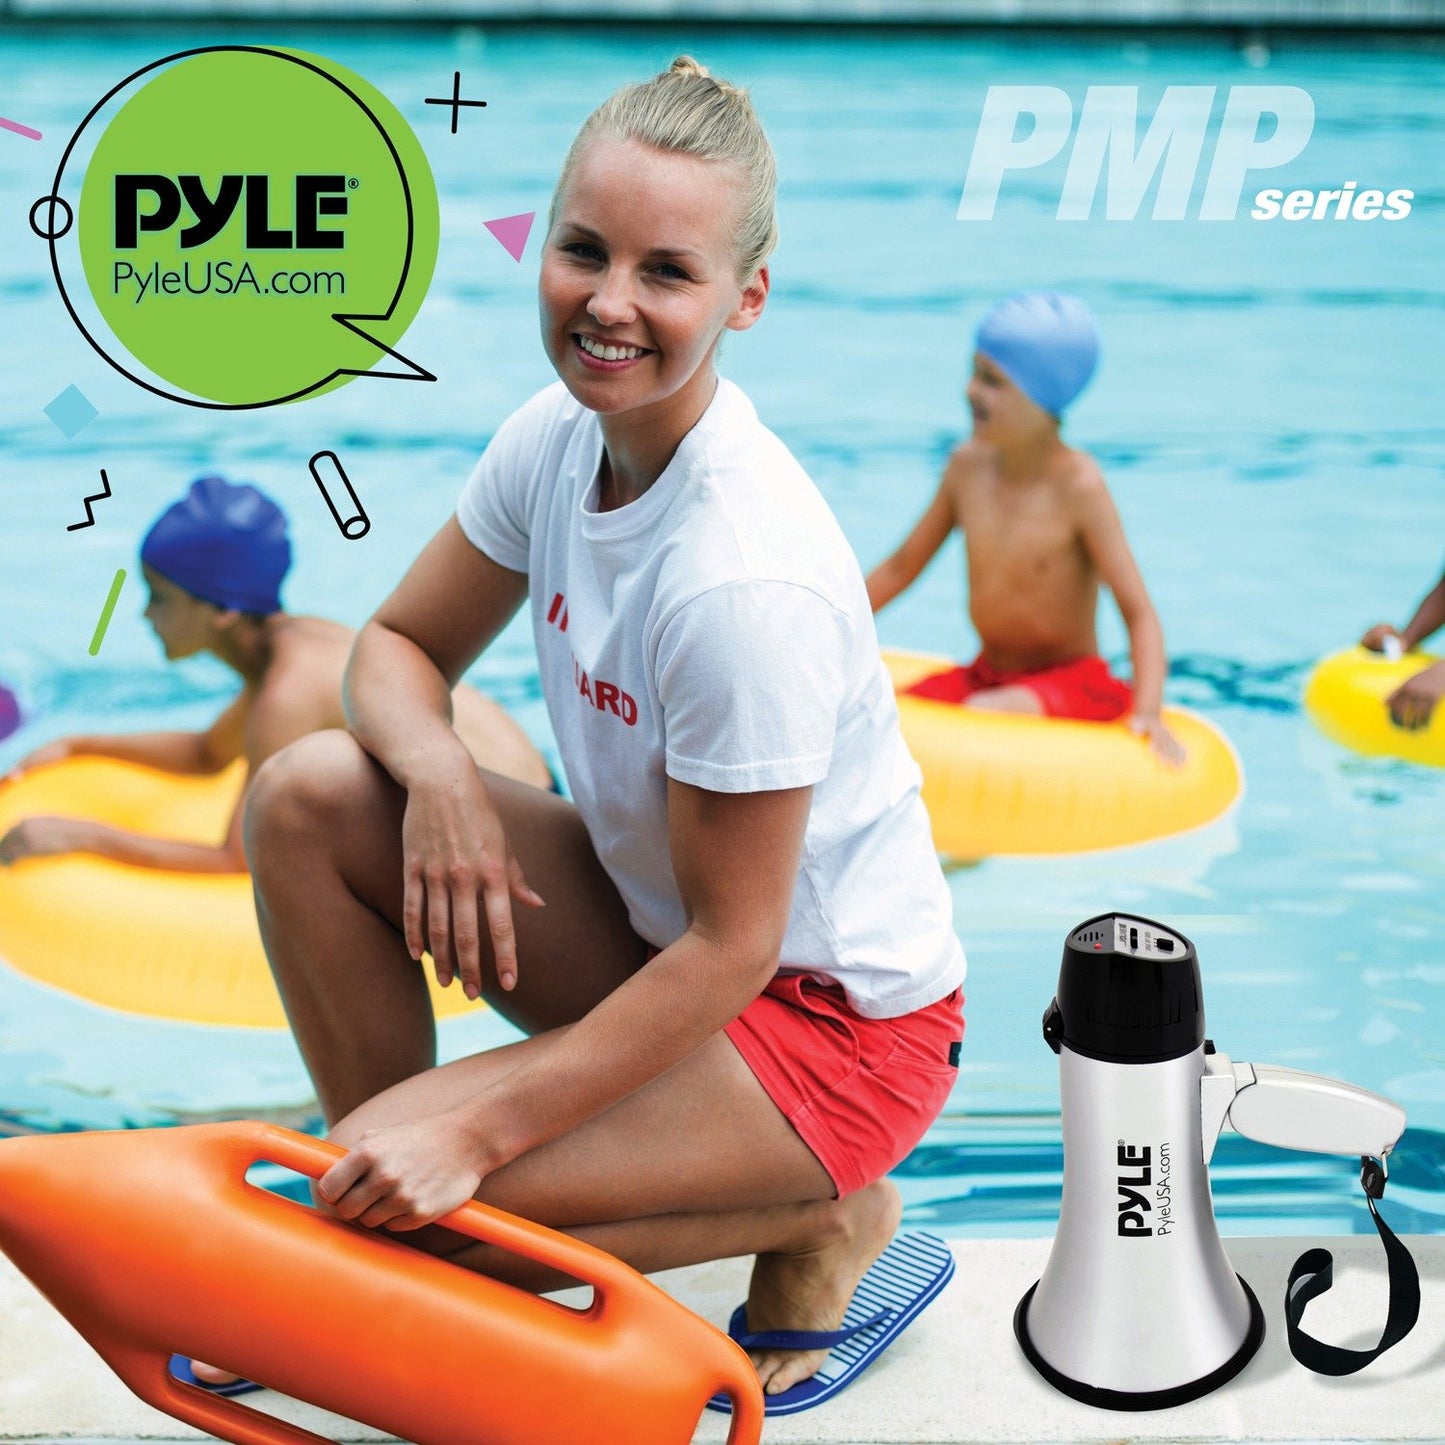 Pyle PMP23SL Compact Megaphone Speaker with Siren Alarm Mode (Silver)